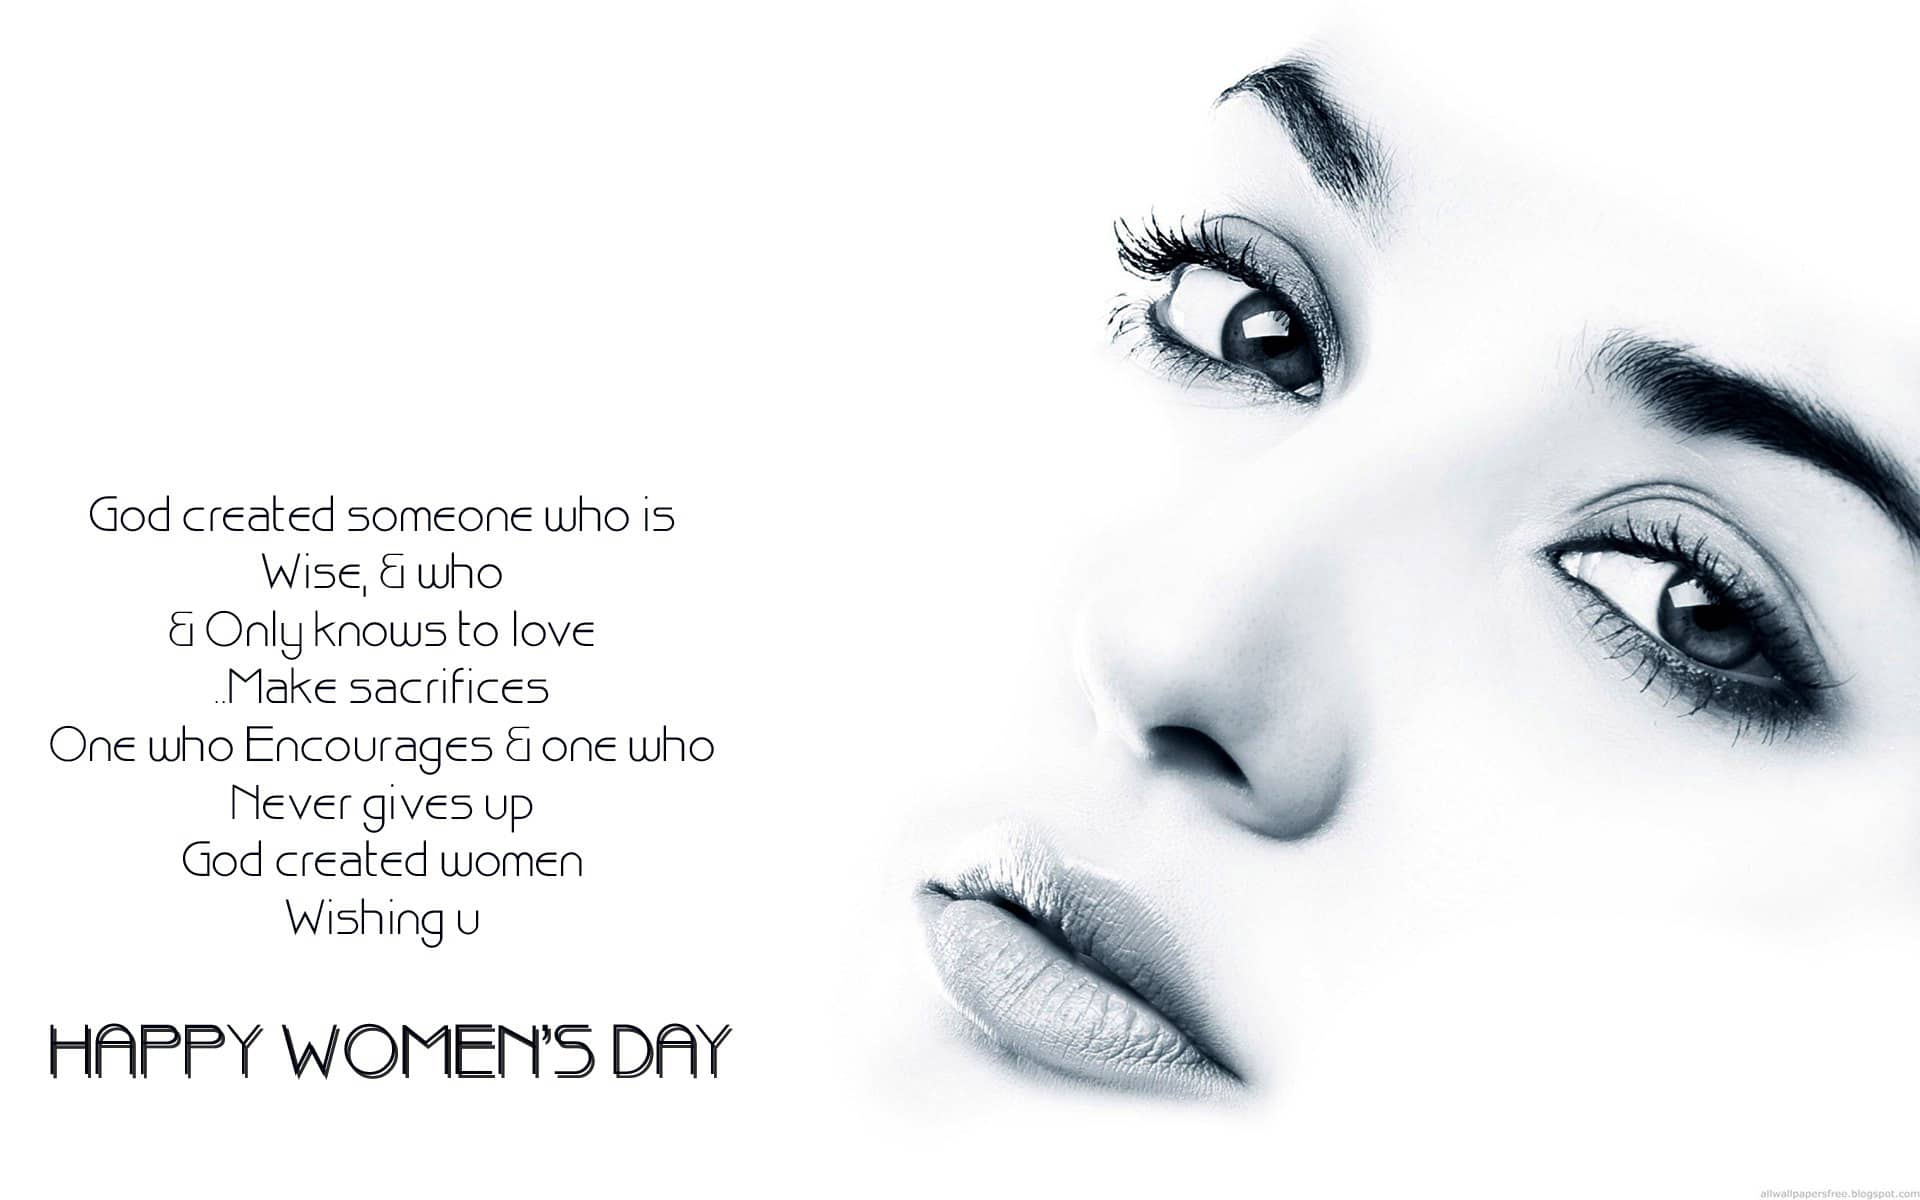 Women's Day Wallpapers and photos